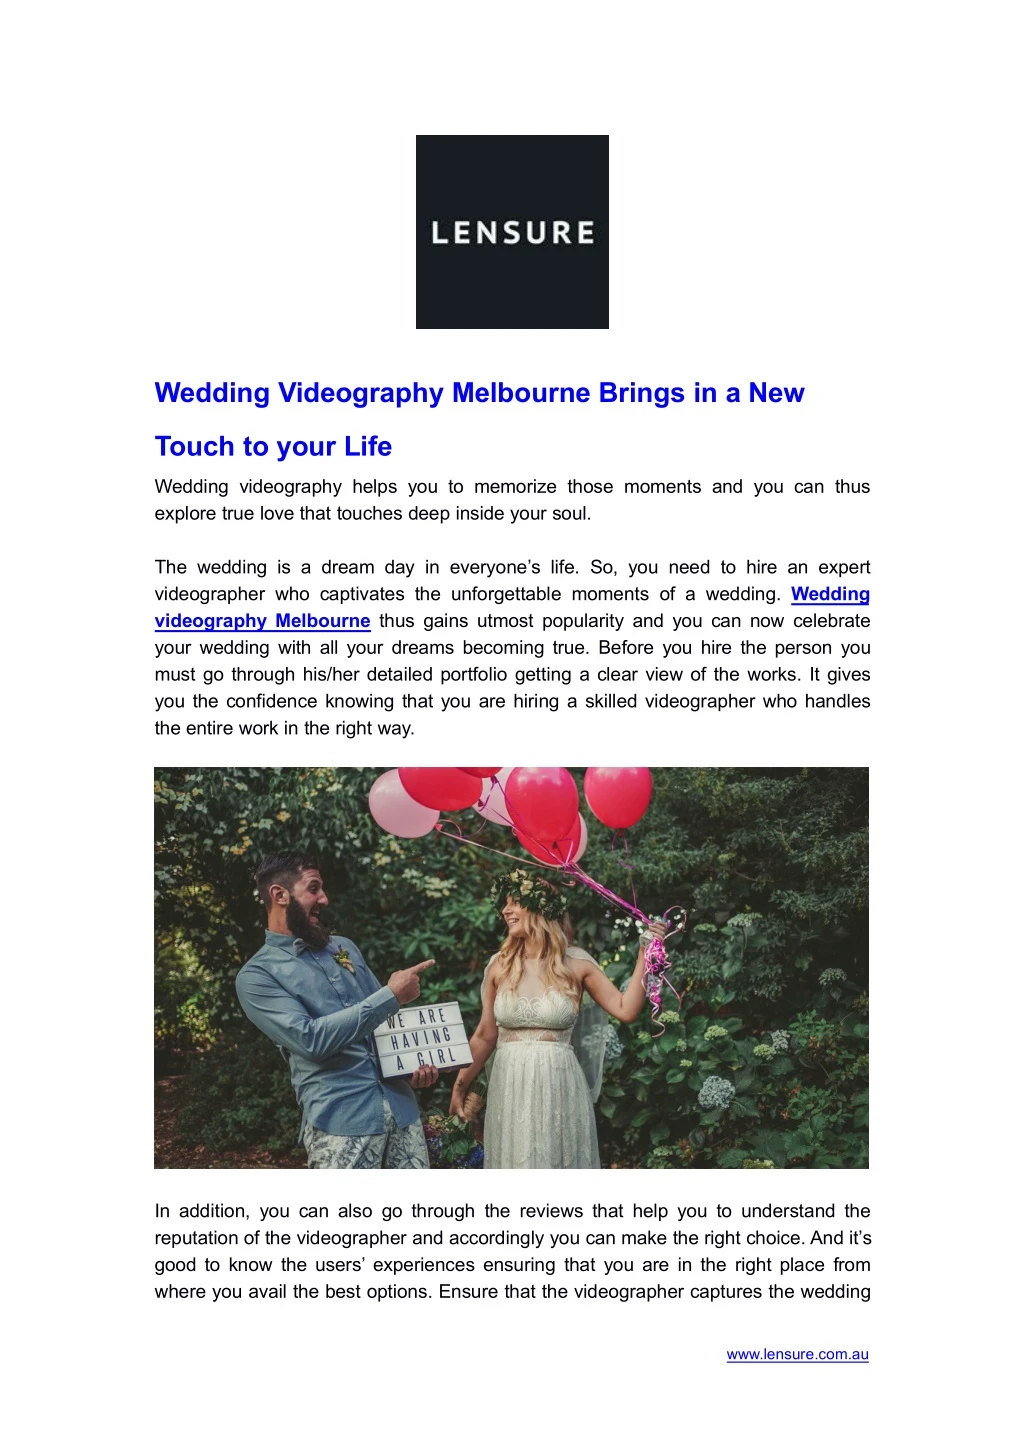 wedding videography melbourne brings in a new